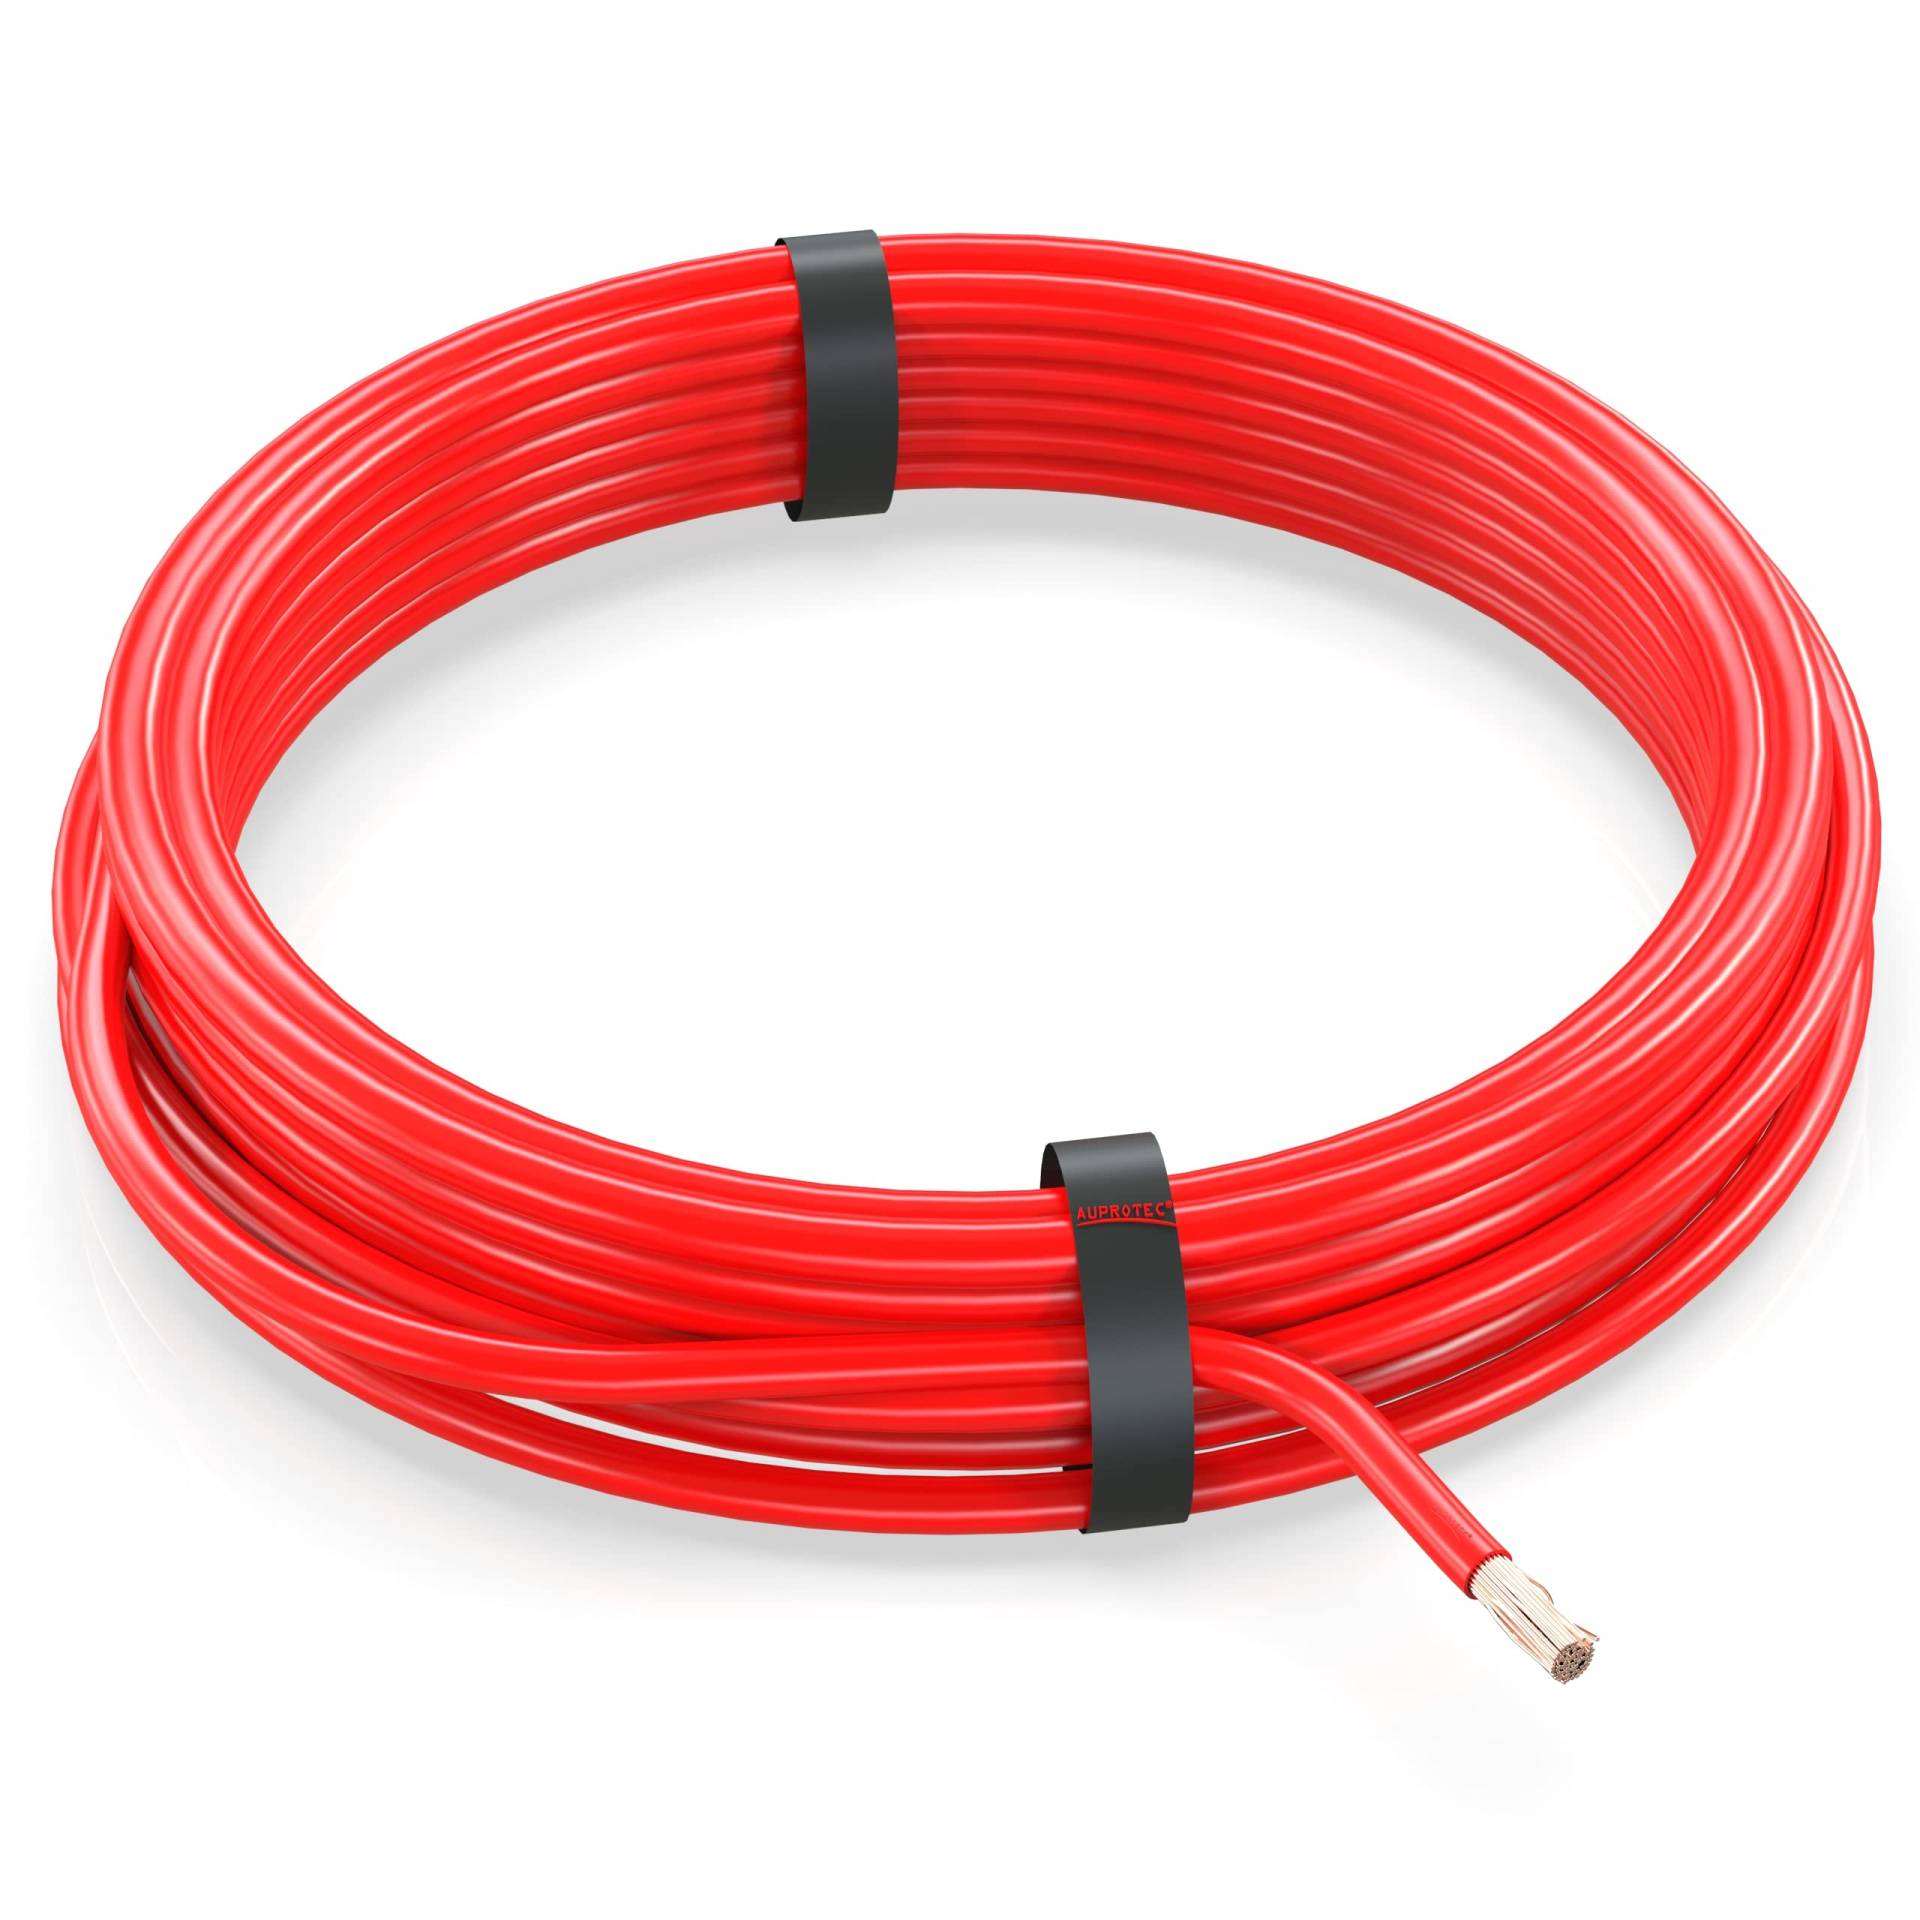 AUPROTEC 10m Fahrzeugleitung 0,50 mm² FLRY-B Auto Kabel als Ring Farbe rot von AUPROTEC